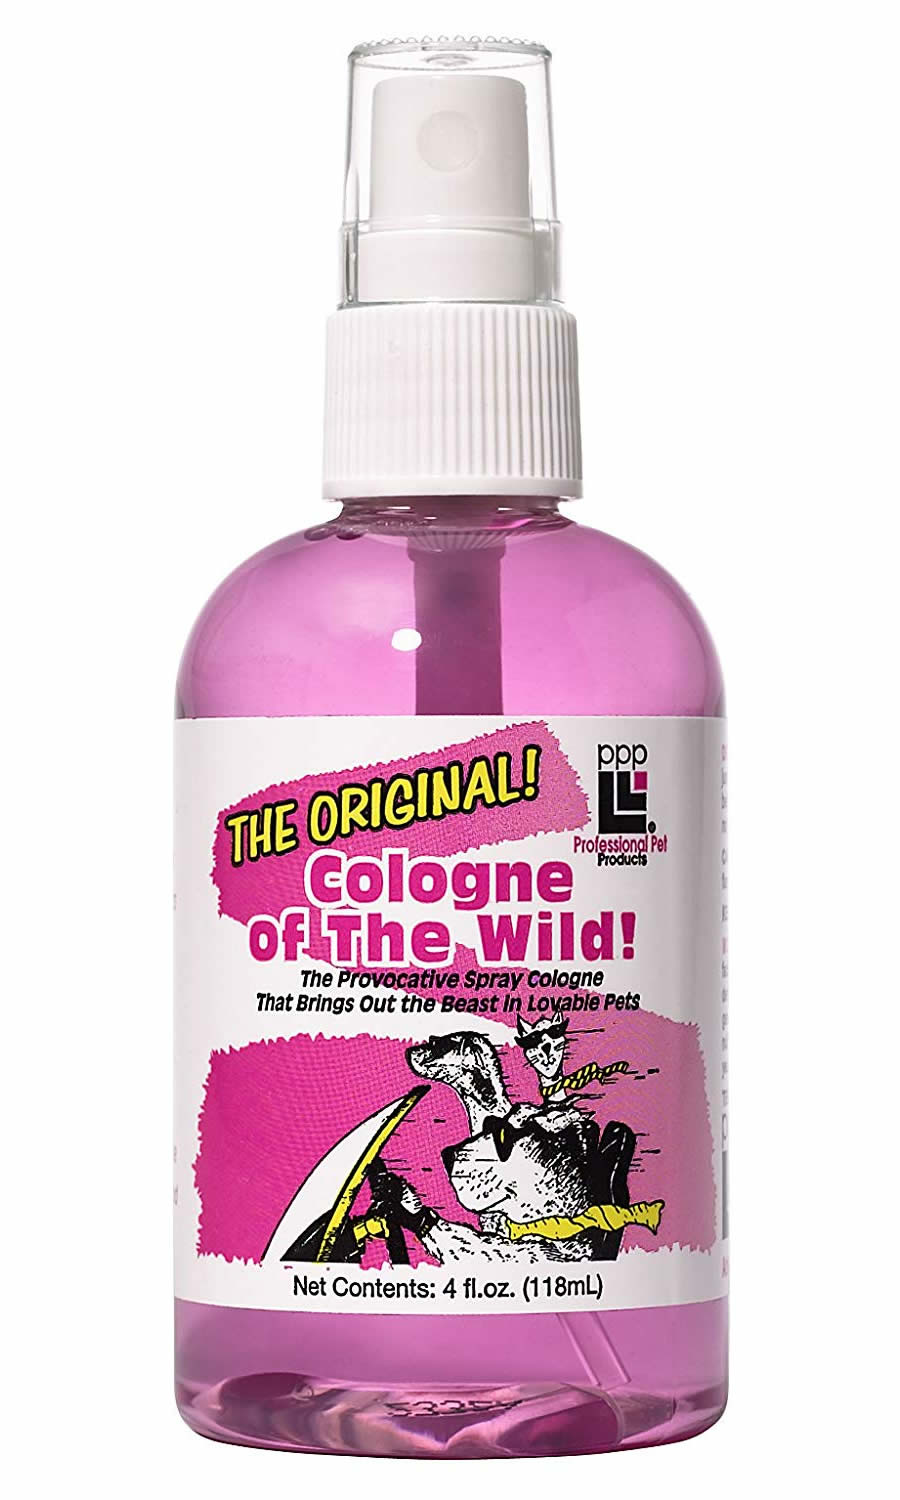 PPP Cologne of the Wild Original-Pet's Choice Supply